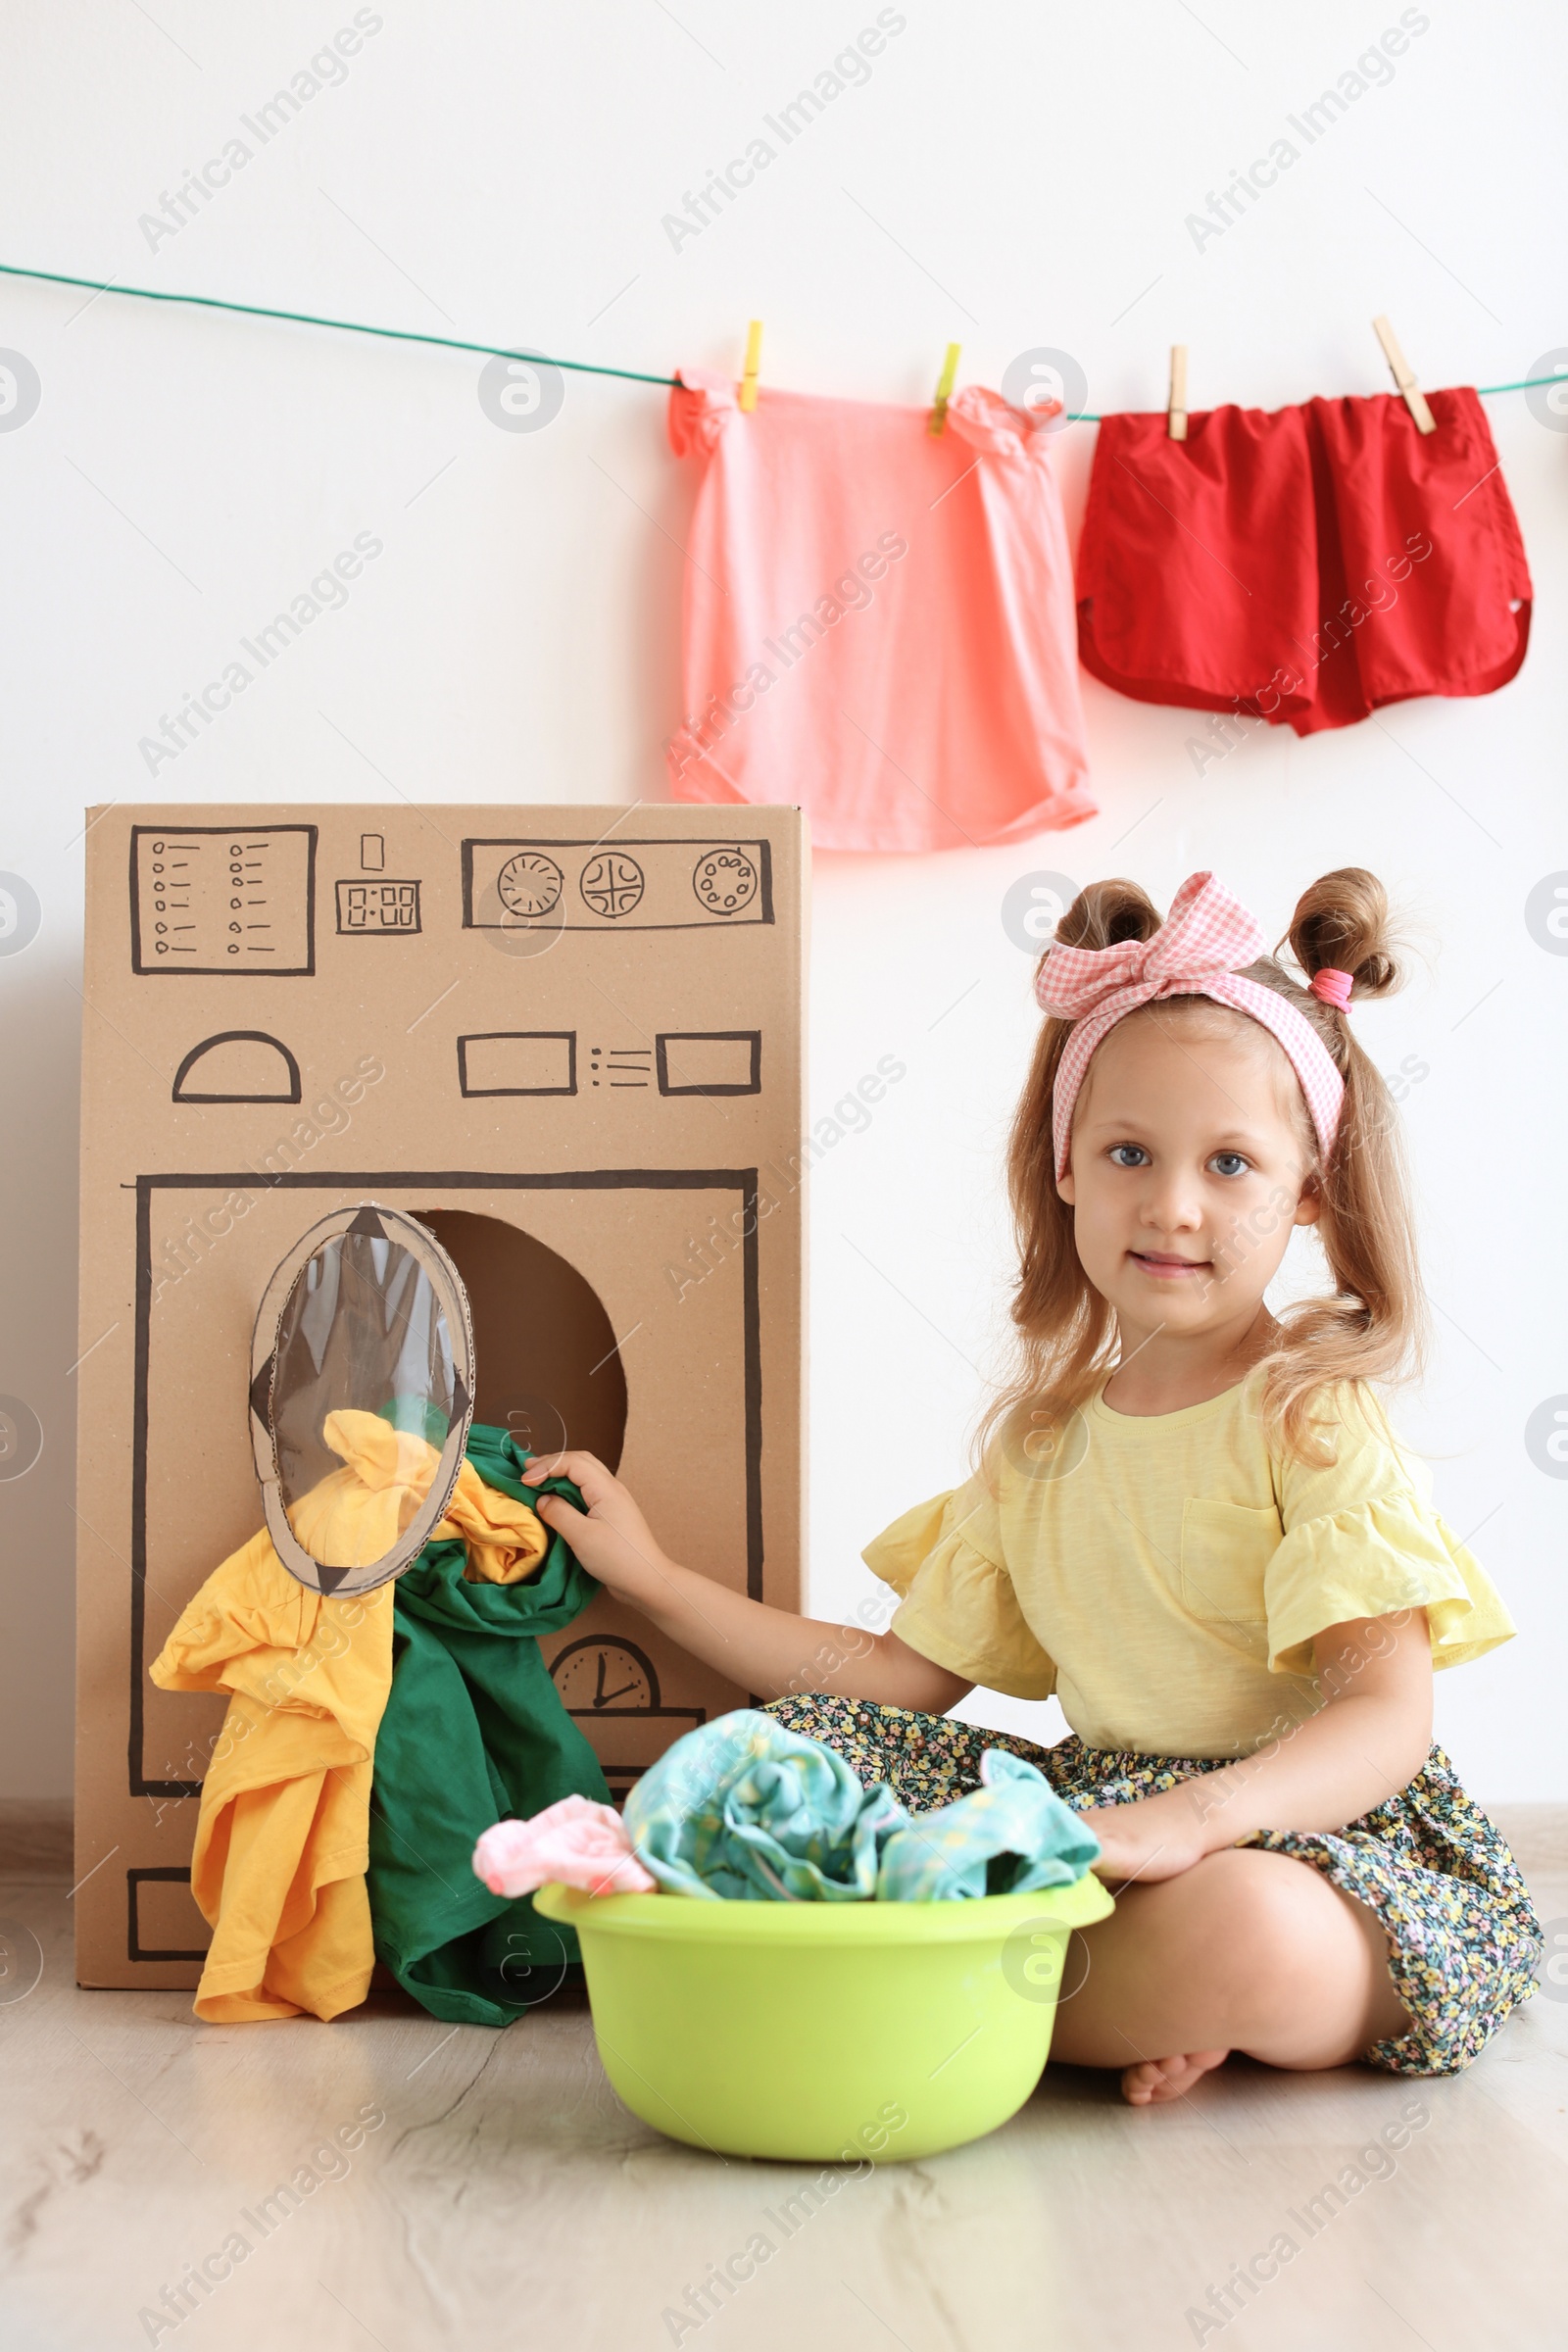 Photo of Adorable little child playing with cardboard washing machine and clothes indoors